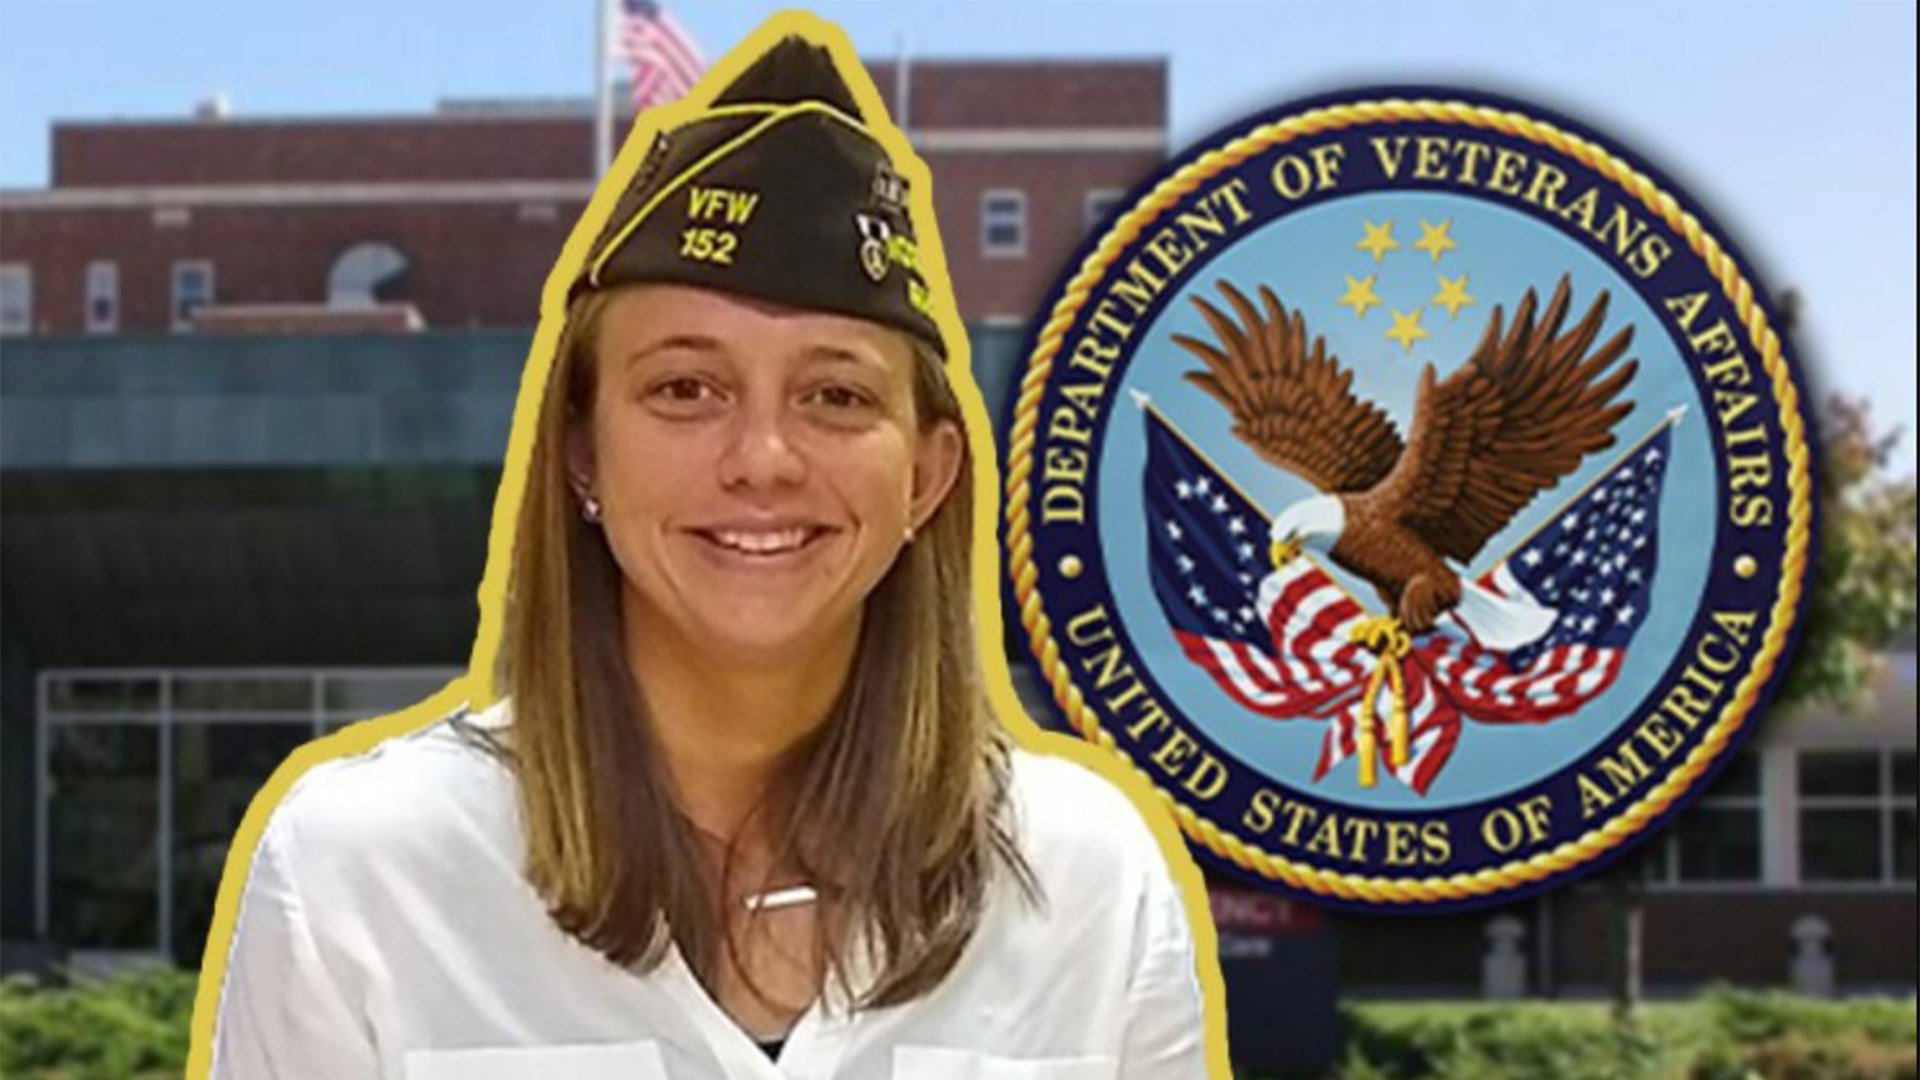 In federal court on Aug. 9, 2022, in Providence, Rhode Island, Sarah Jane Cavanaugh, 31, admitted that she falsely portrayed herself as a wounded US Marine Corps veteran who had served overseas. Coffee or Die Magazine composite.